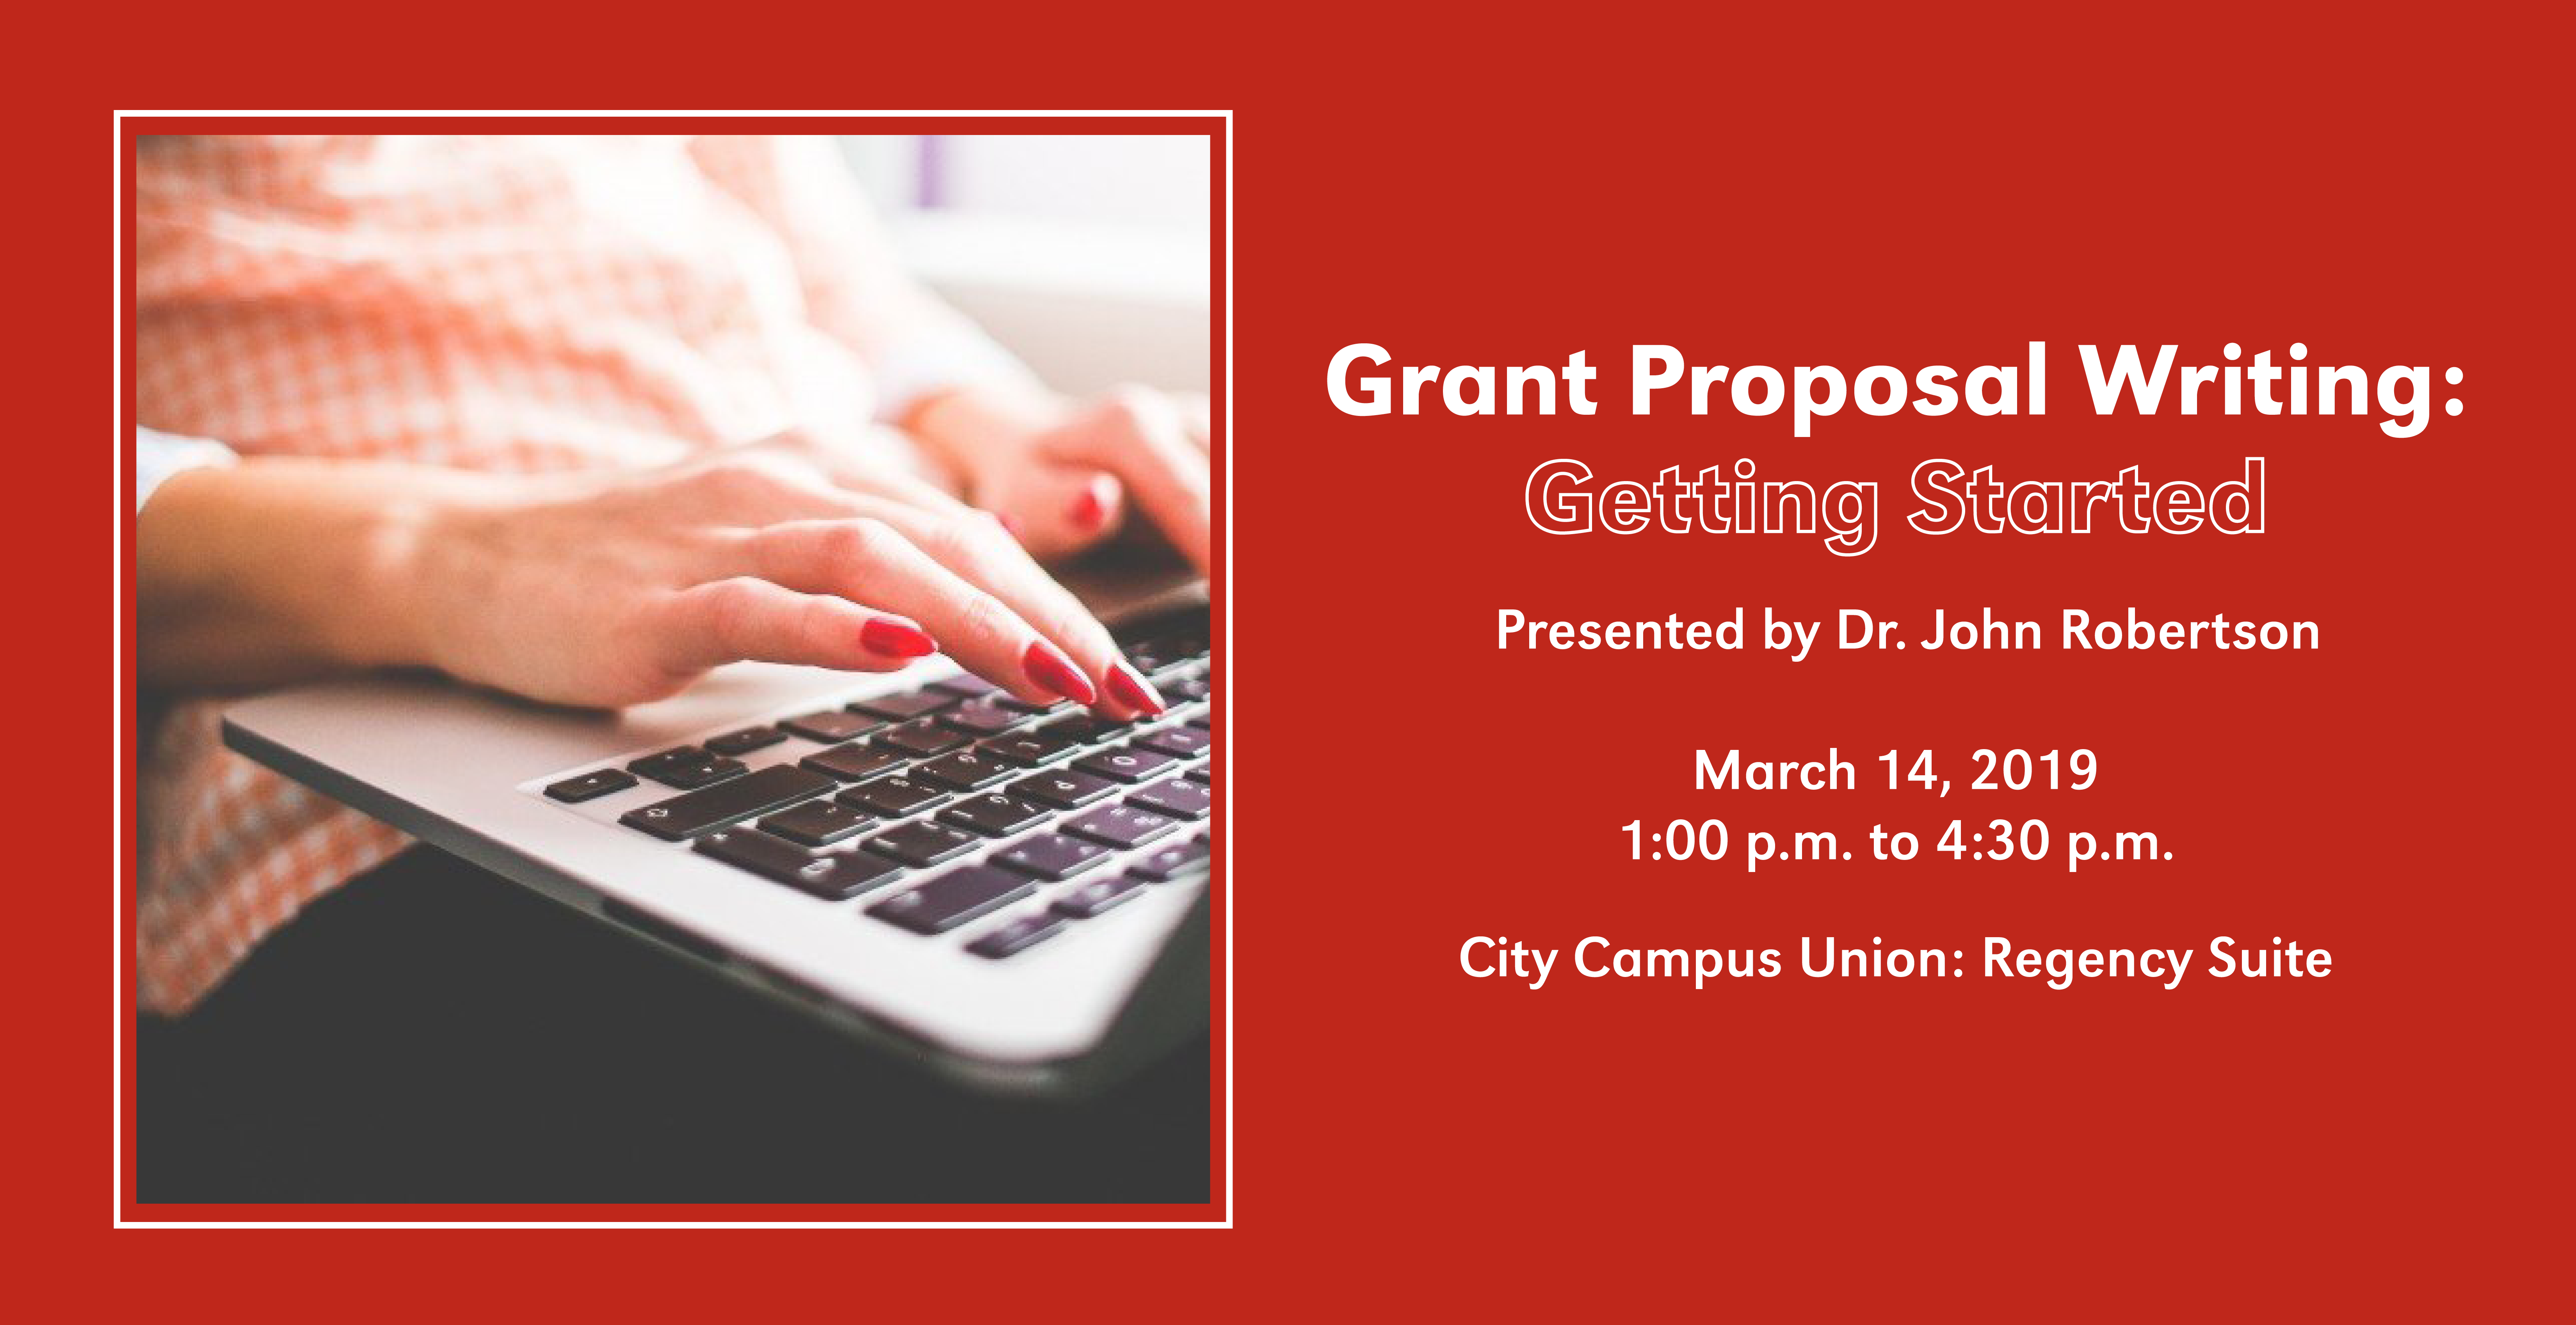 Grant Proposal Writing: Getting Started presented by Dr. John Robertson on March 14, 2019 from 1:00 p.m. to 4:30 p.m.